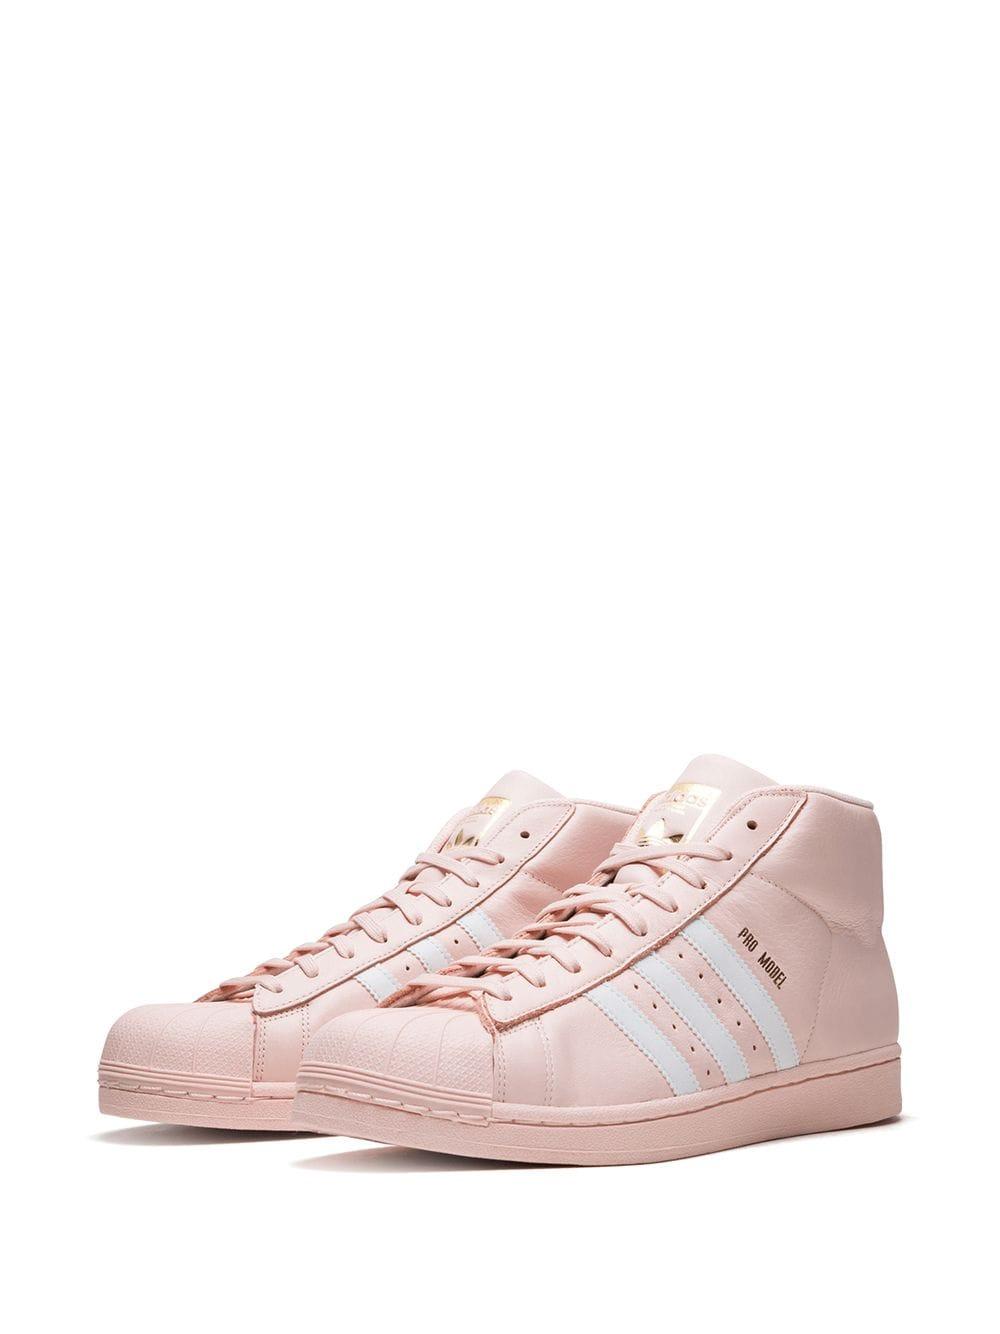 adidas Pro Model High Top Sneakers in Pink for Men | Lyst